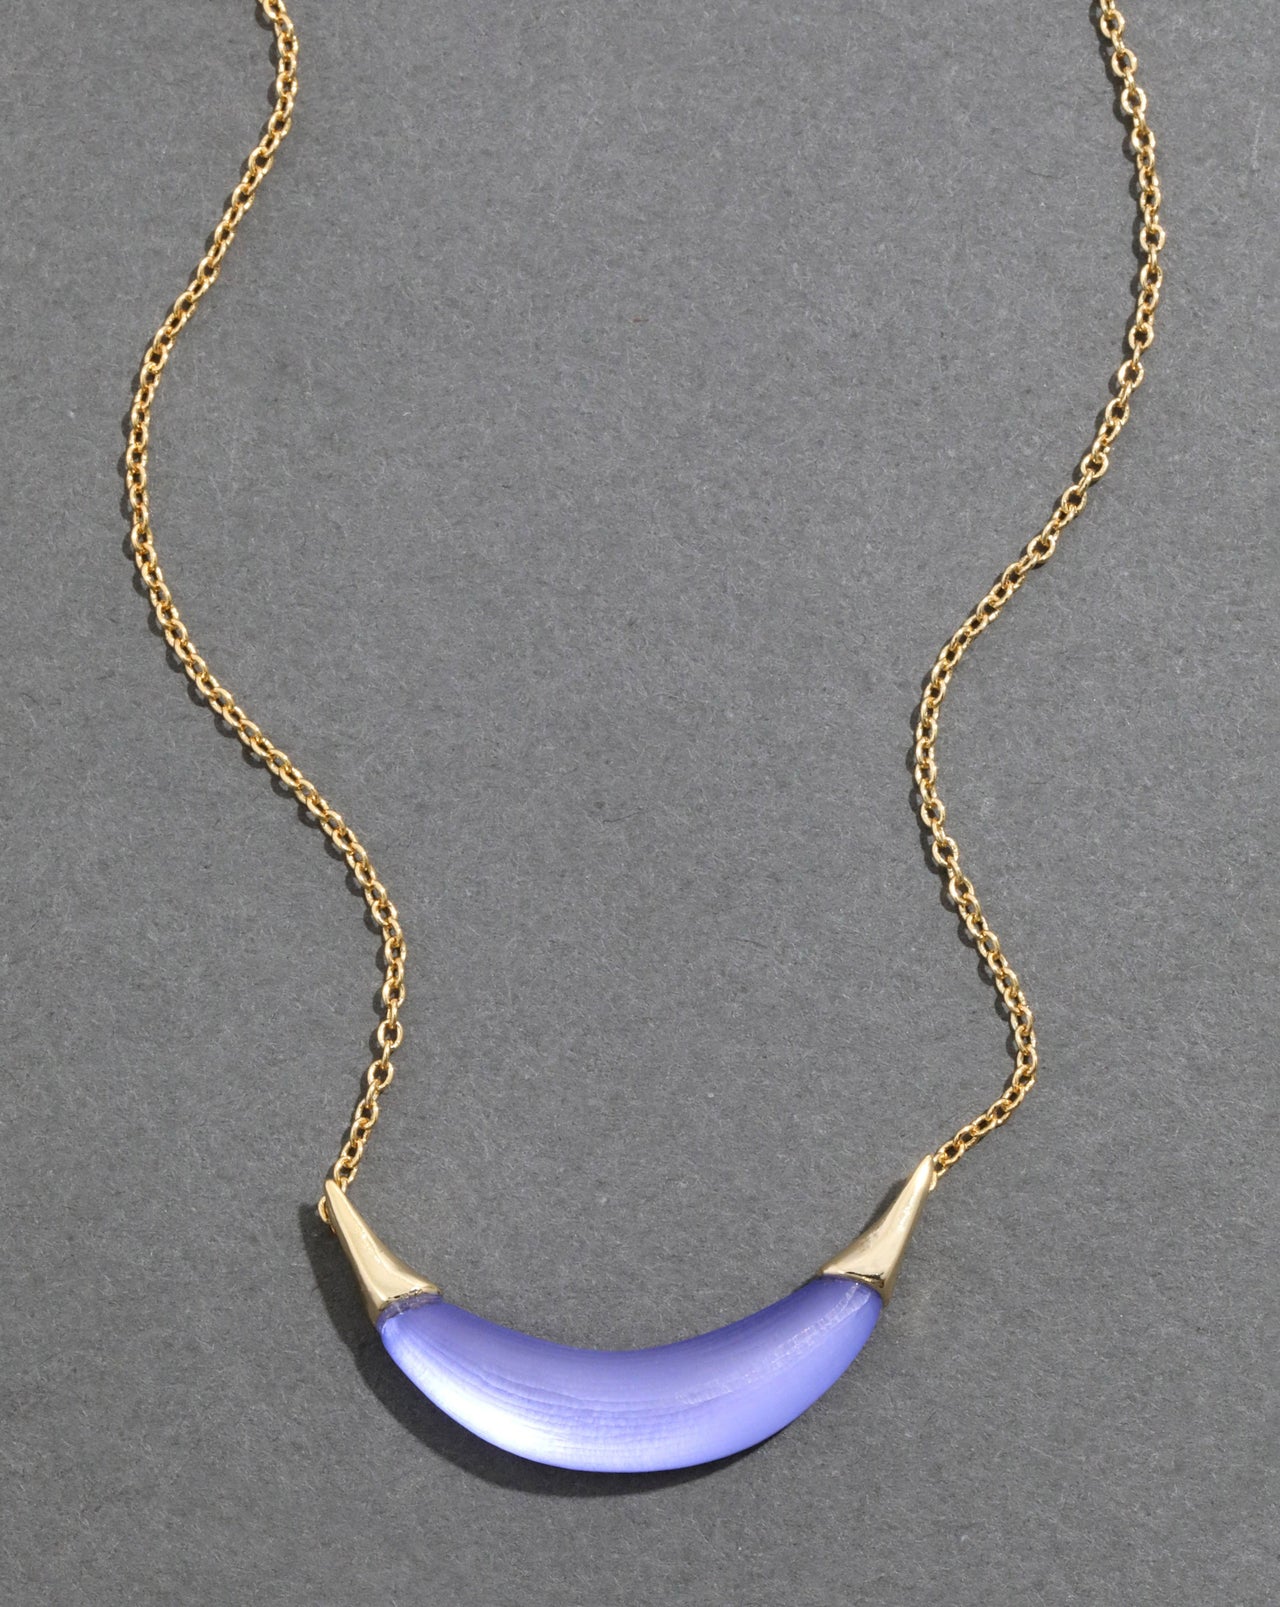 Gold Capped Crescent Lucite Necklace- Electric Violet - Photo 2